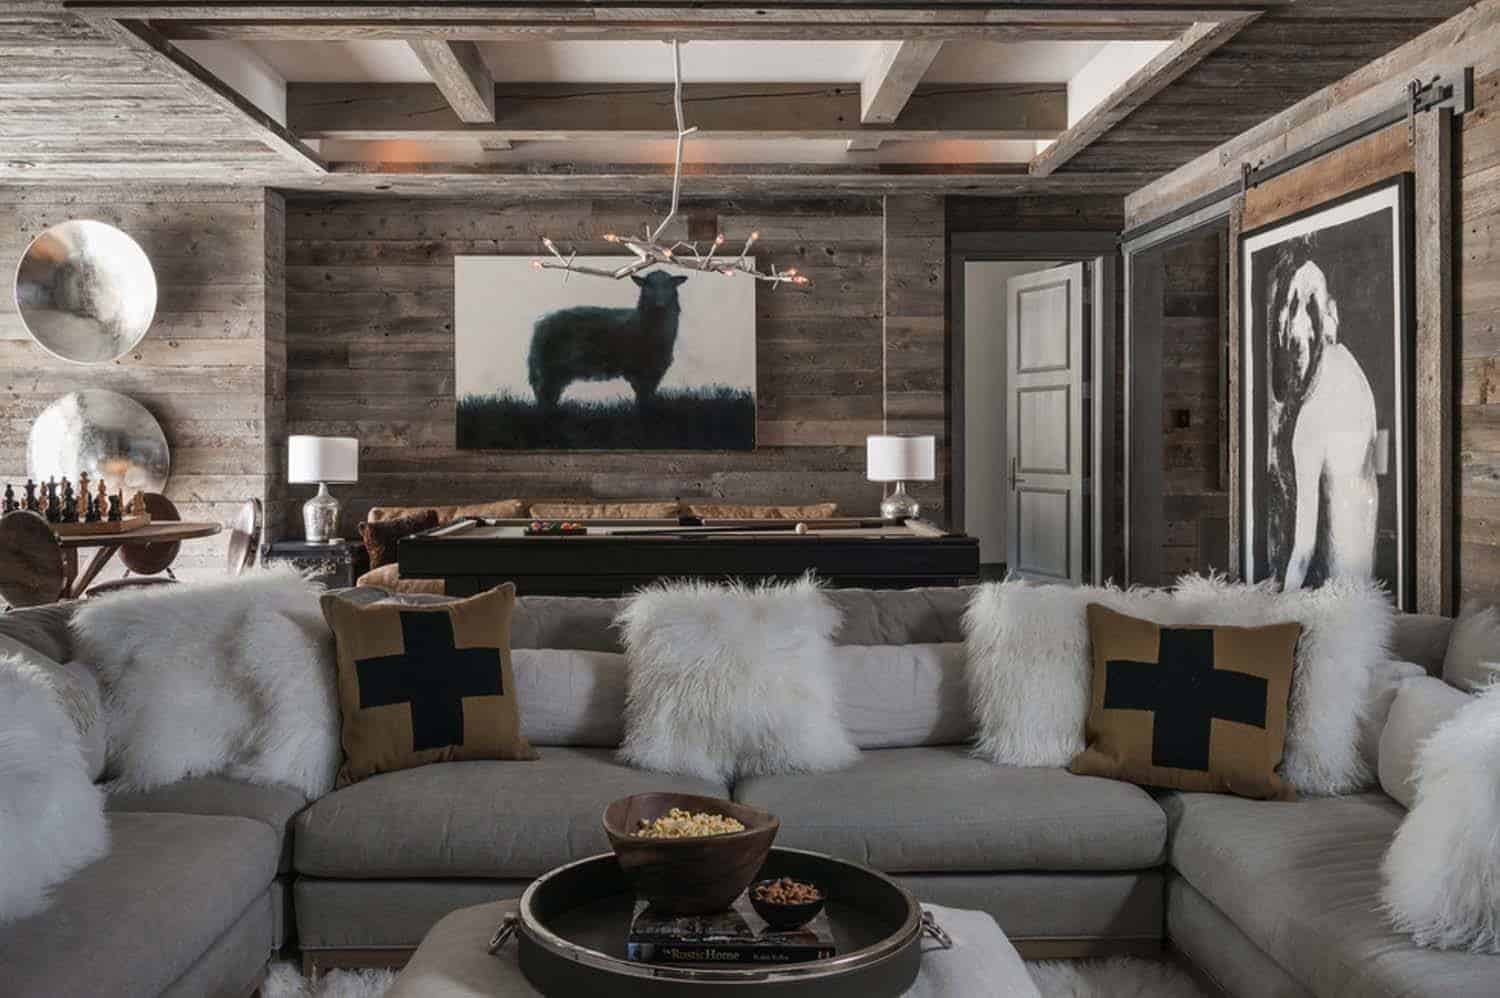 Ski-in/ski-out chalet in Montana with rustic-modern styling